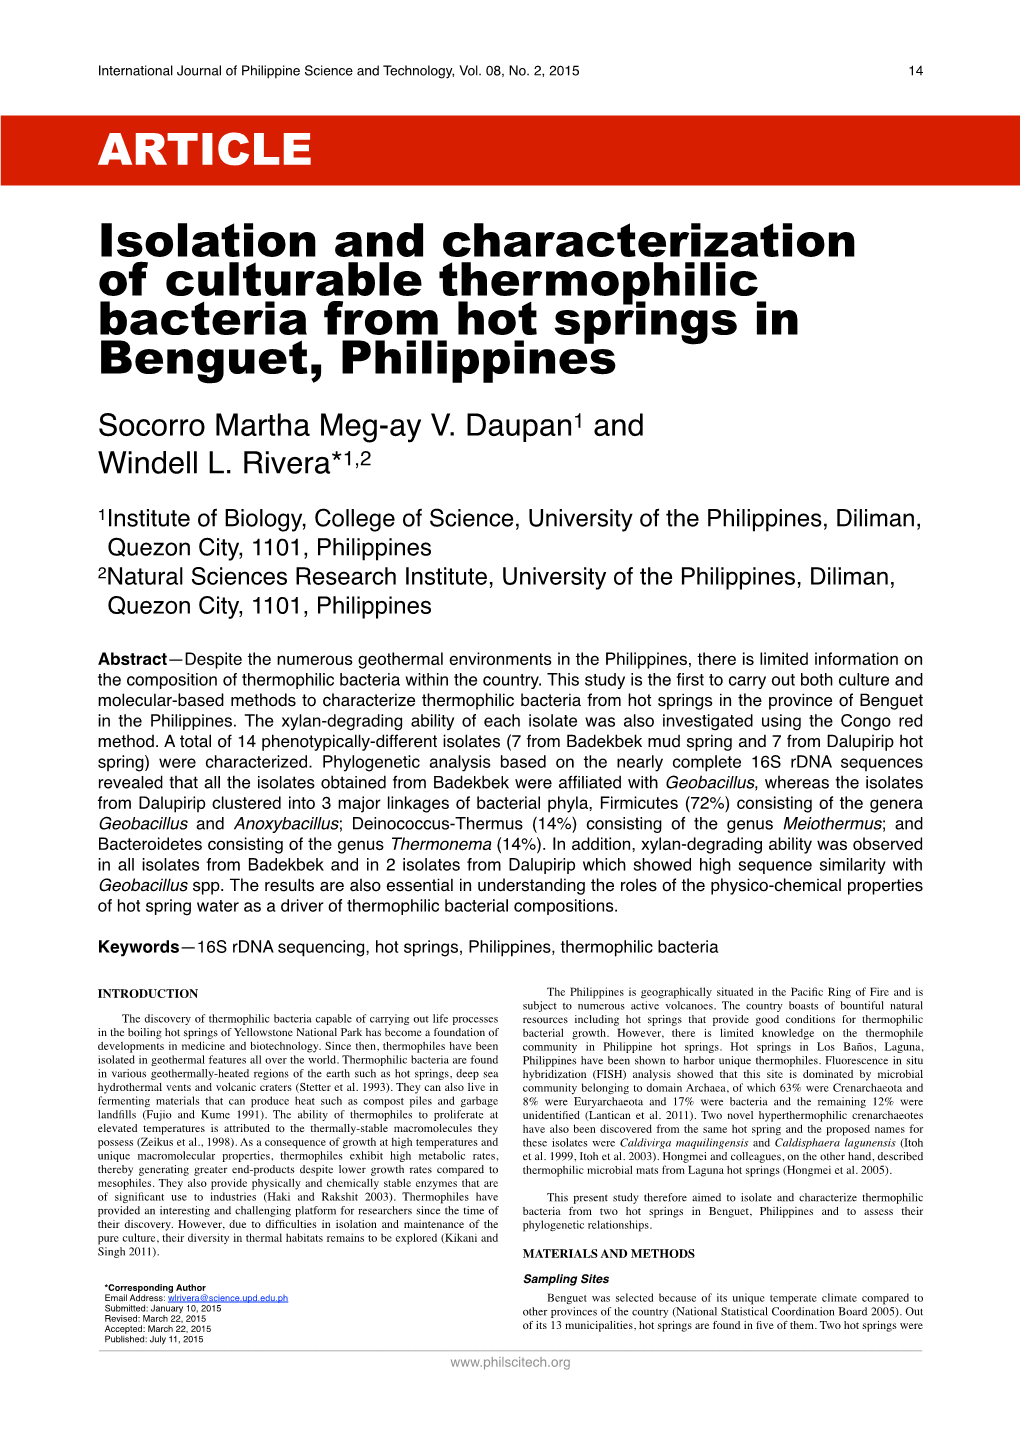 Isolation and Characterization of Culturable Thermophilic Bacteria from Hot Springs in Benguet, Philippines Socorro Martha Meg-Ay V